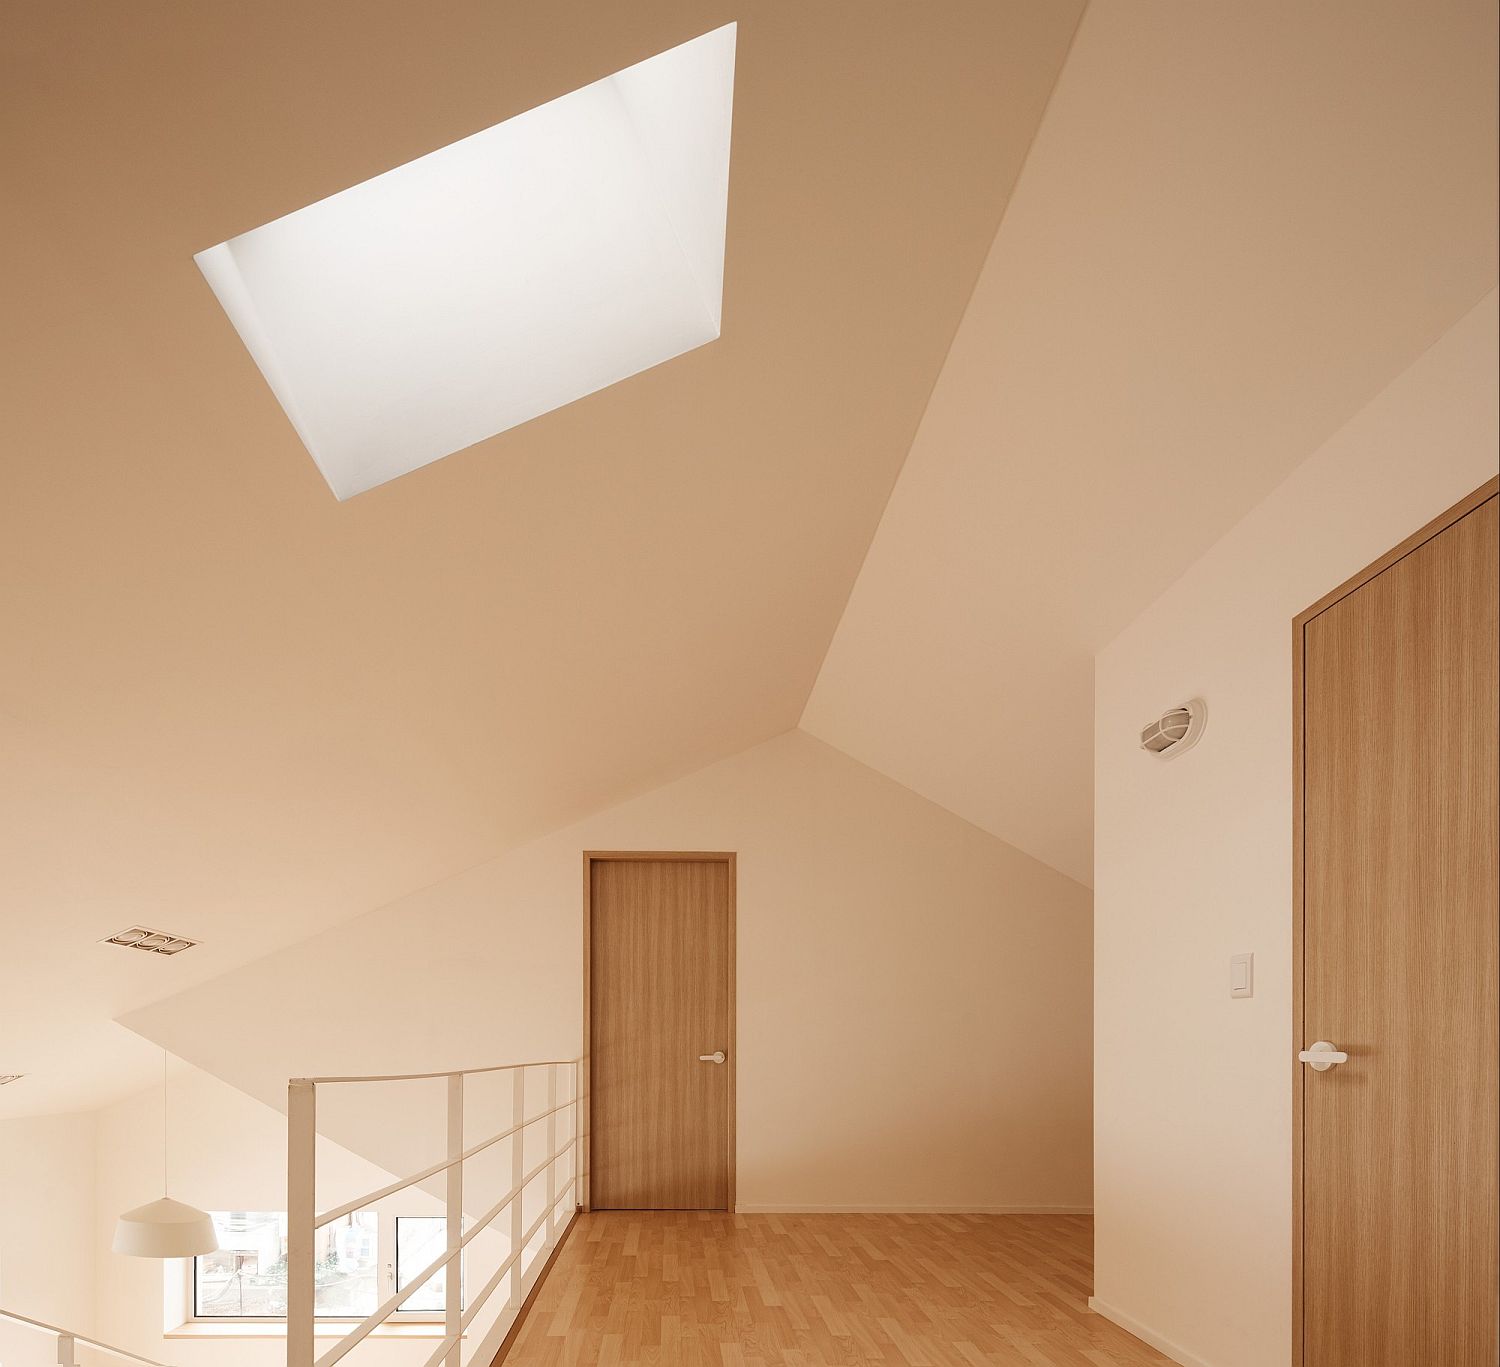 Skylight brings ample natural light into the house